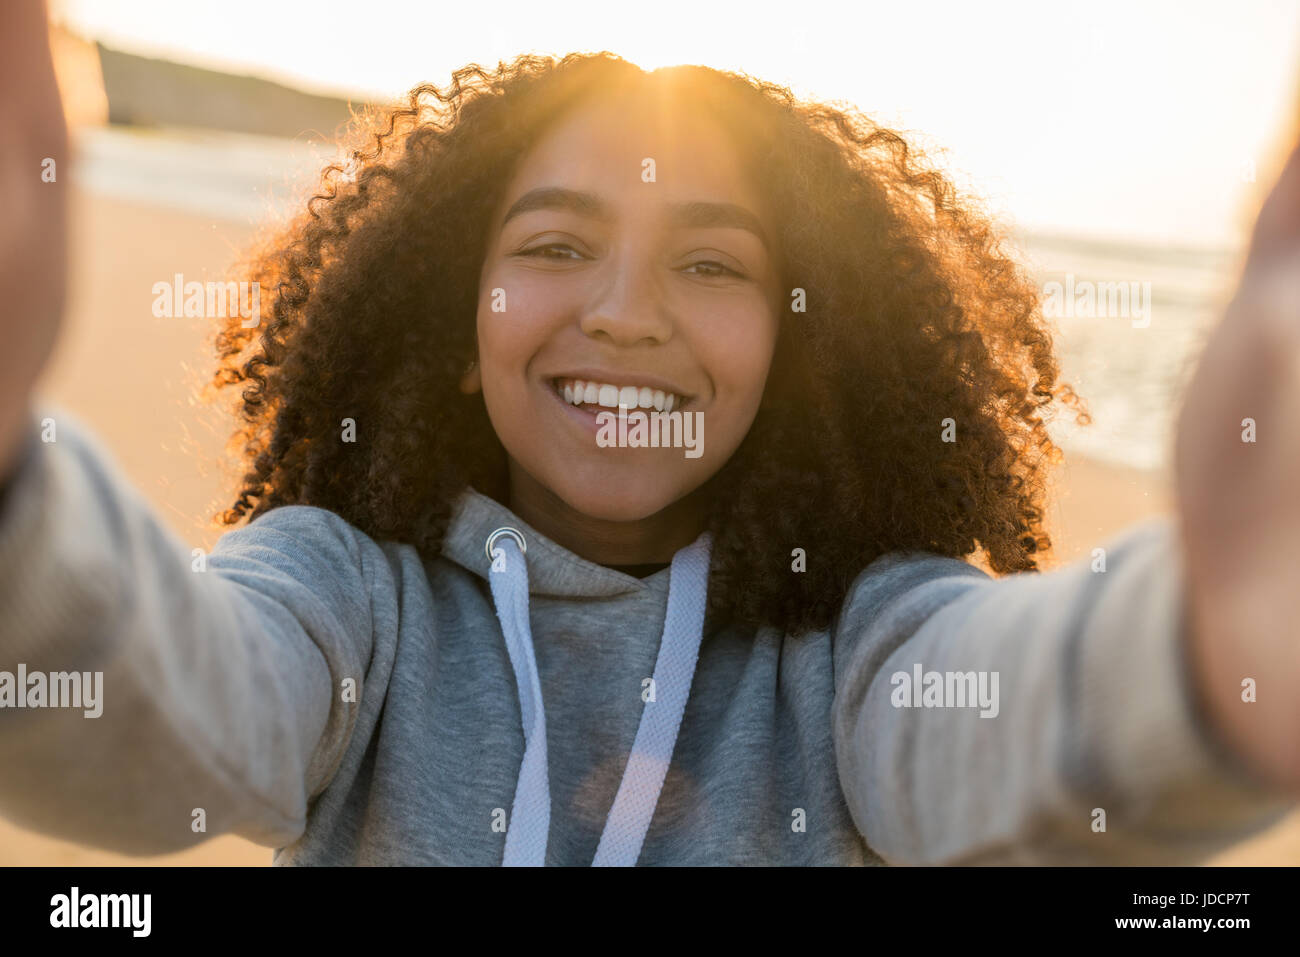 Outdoor portrait of beautiful happy mixed race African American girl teenager female young woman on a beach taking a selfie photograph smiling laughin Stock Photo